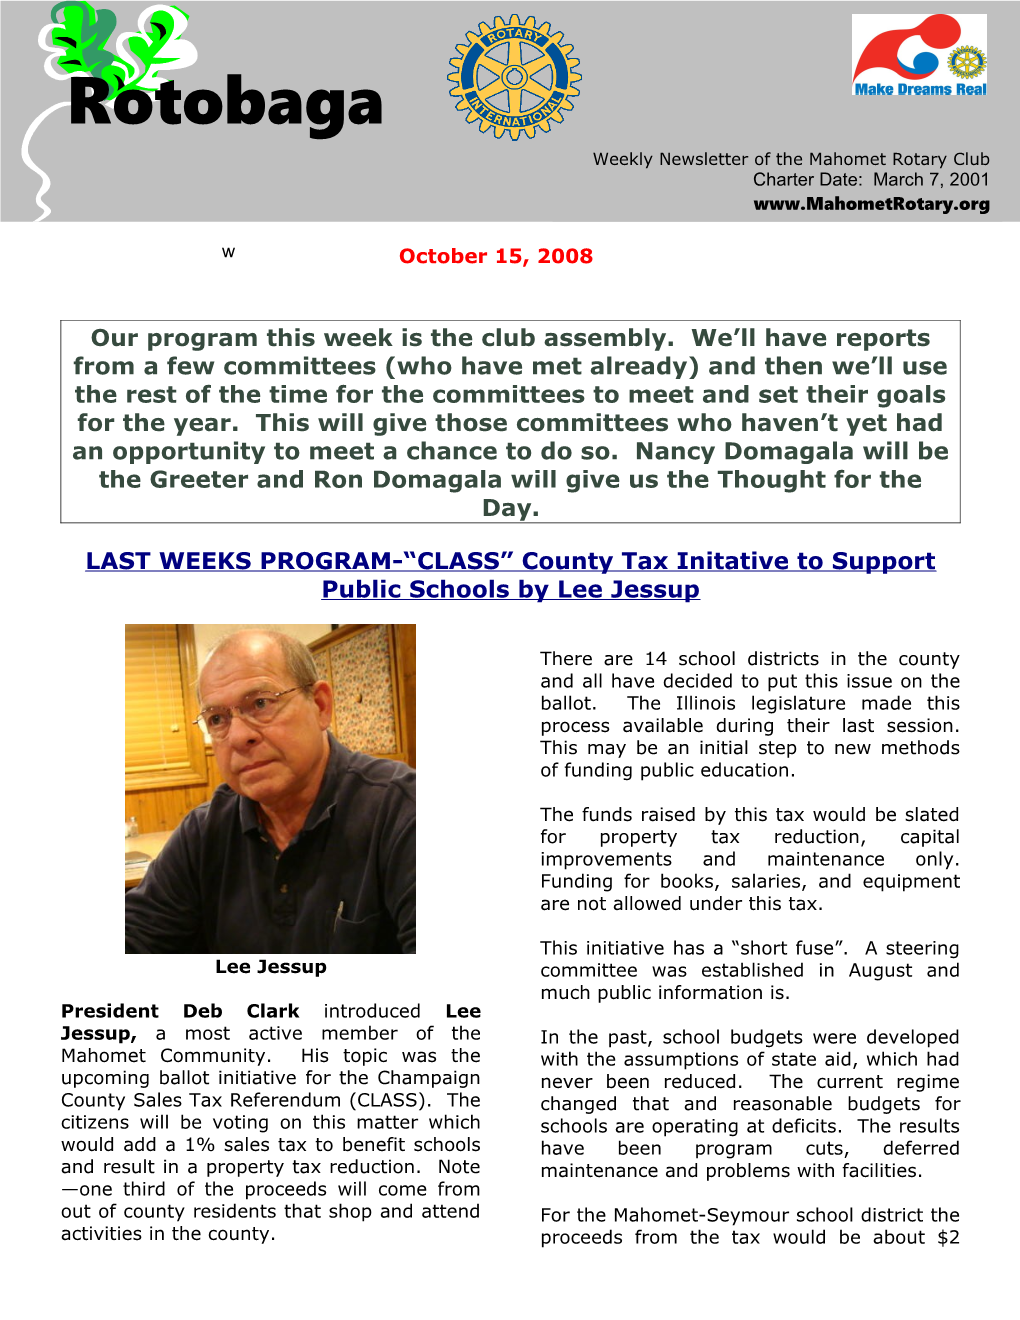 LAST WEEKS PROGRAM- CLASS Countytax Initative to Support Public Schools by Lee Jessup